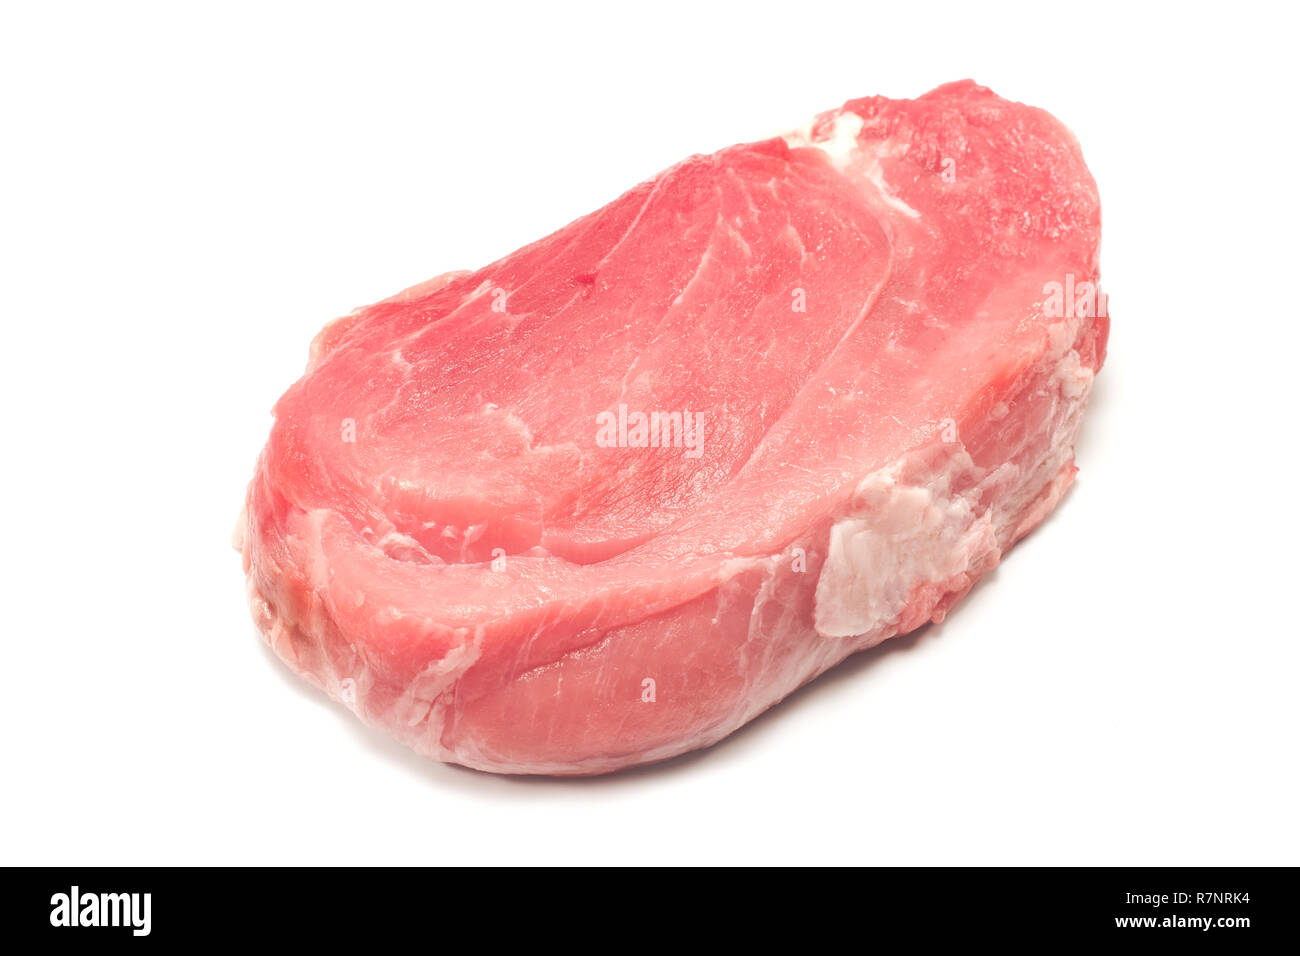 Raw pork meat isolated on white background Stock Photo